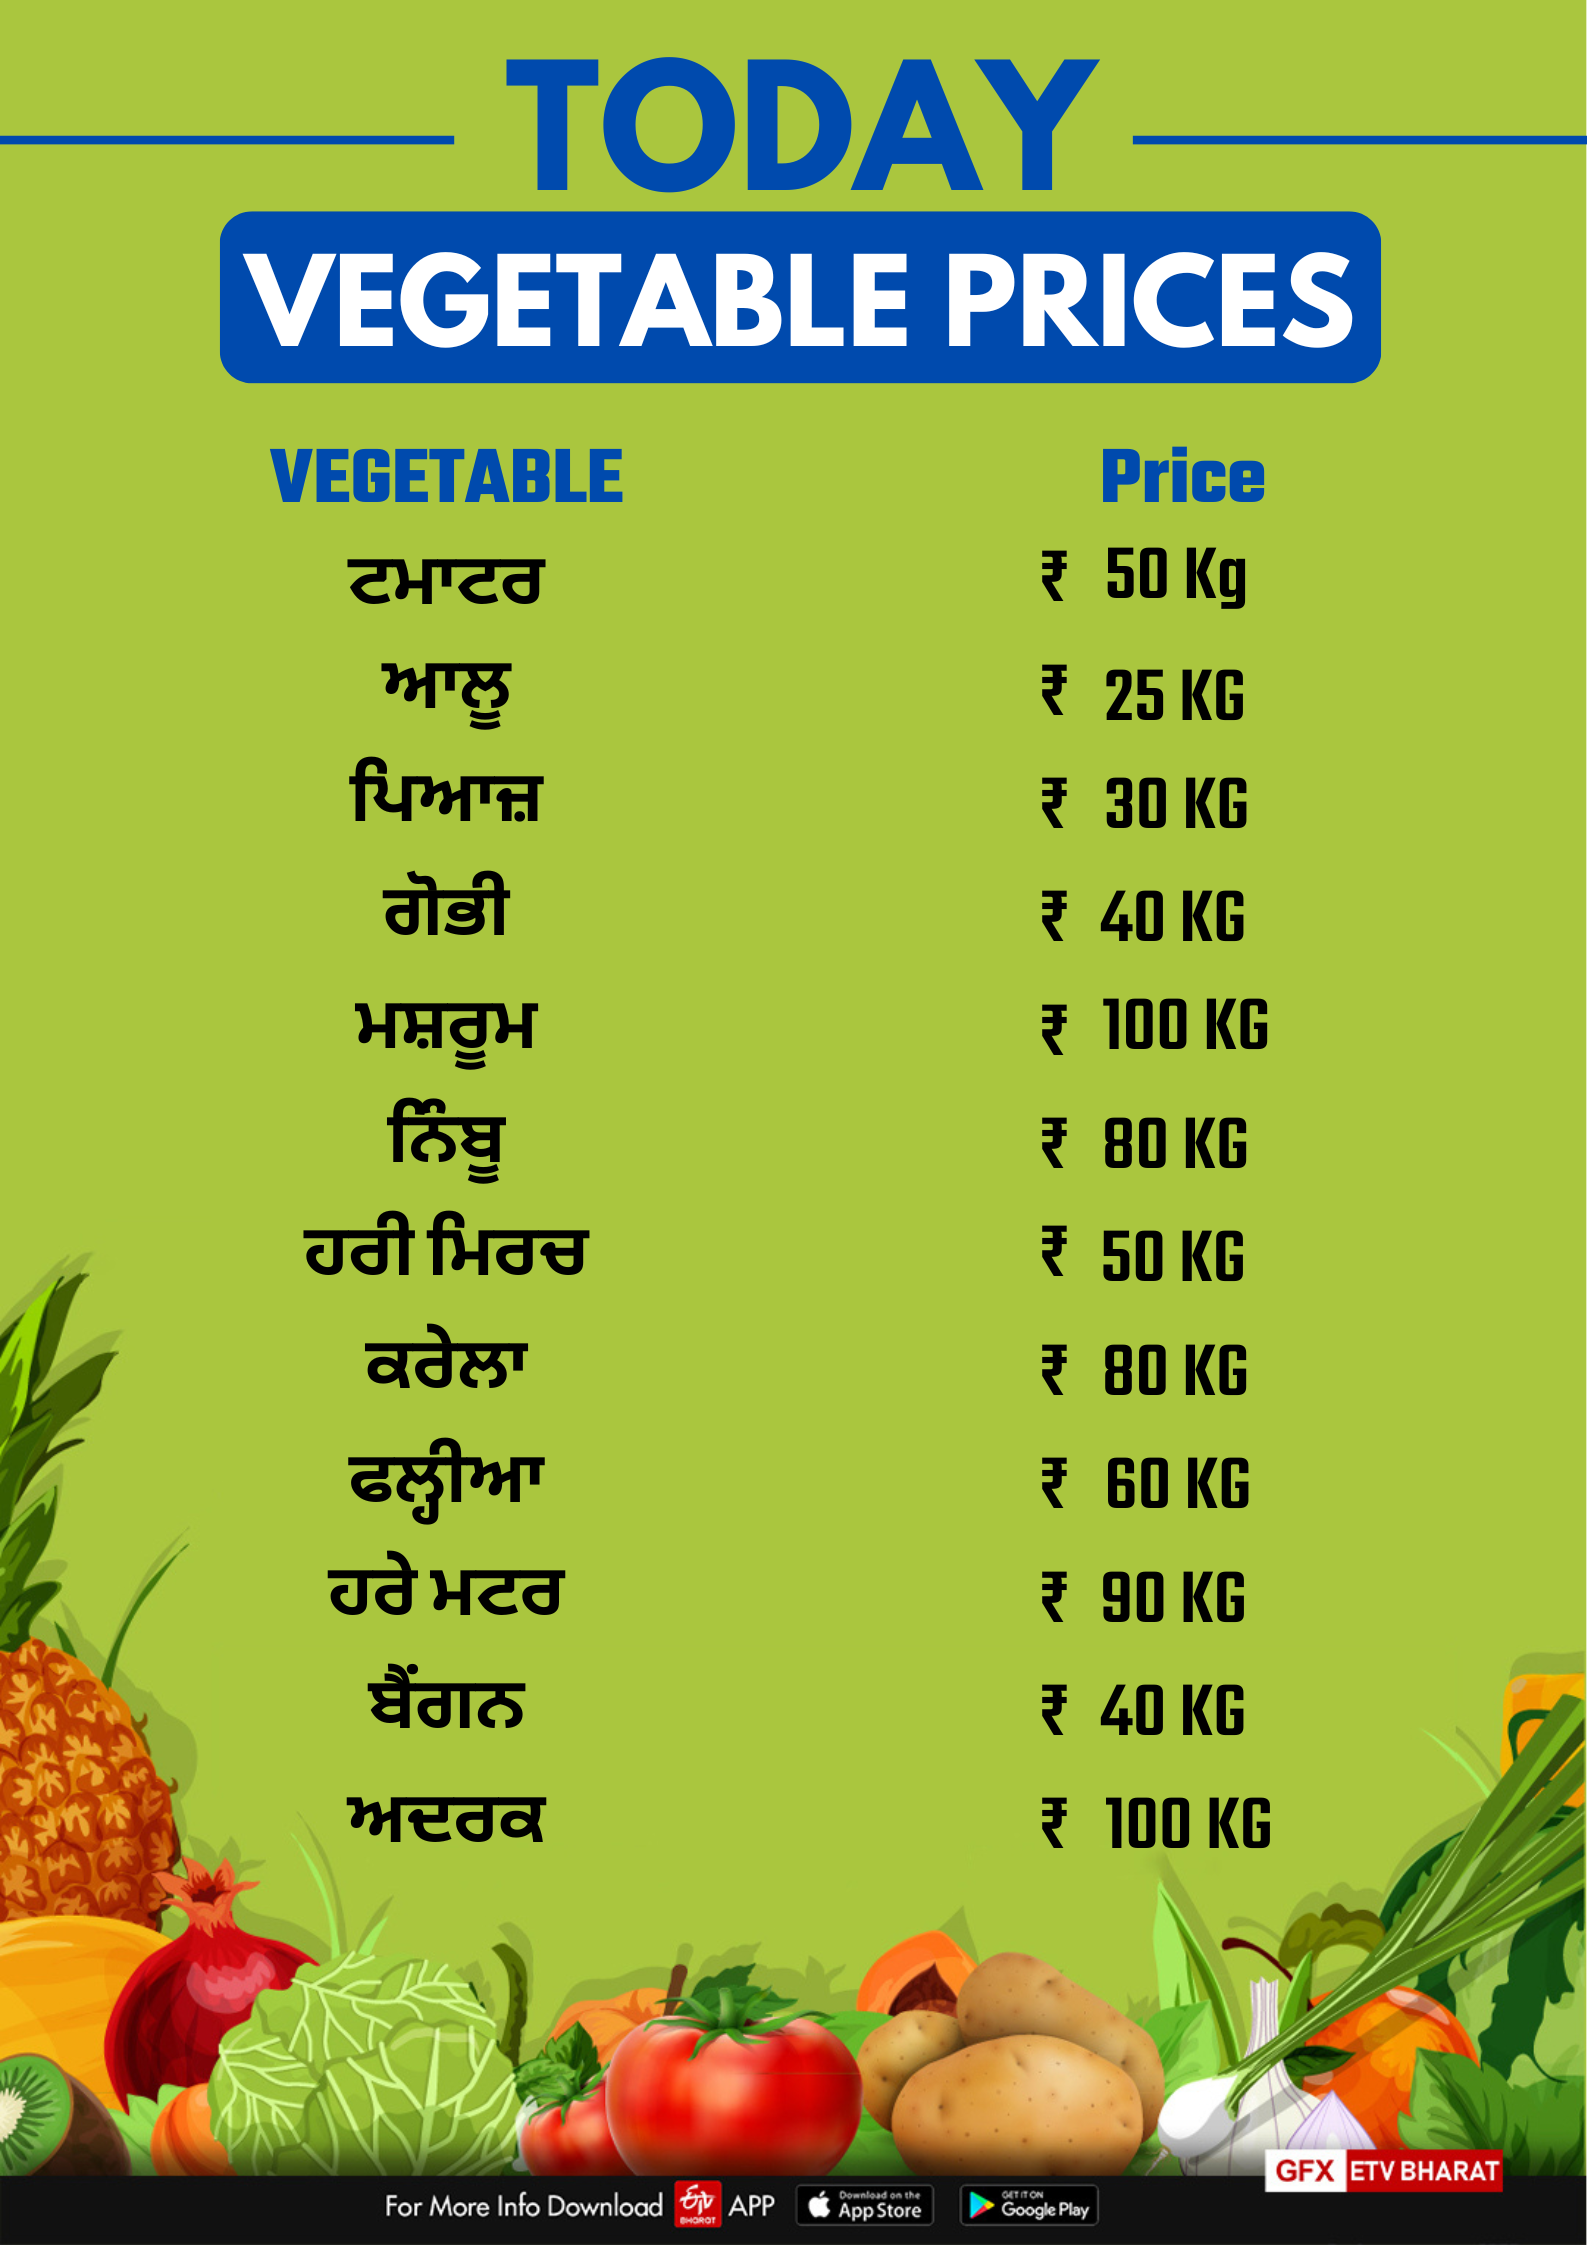 Vegetable rates in Punjab on October 24